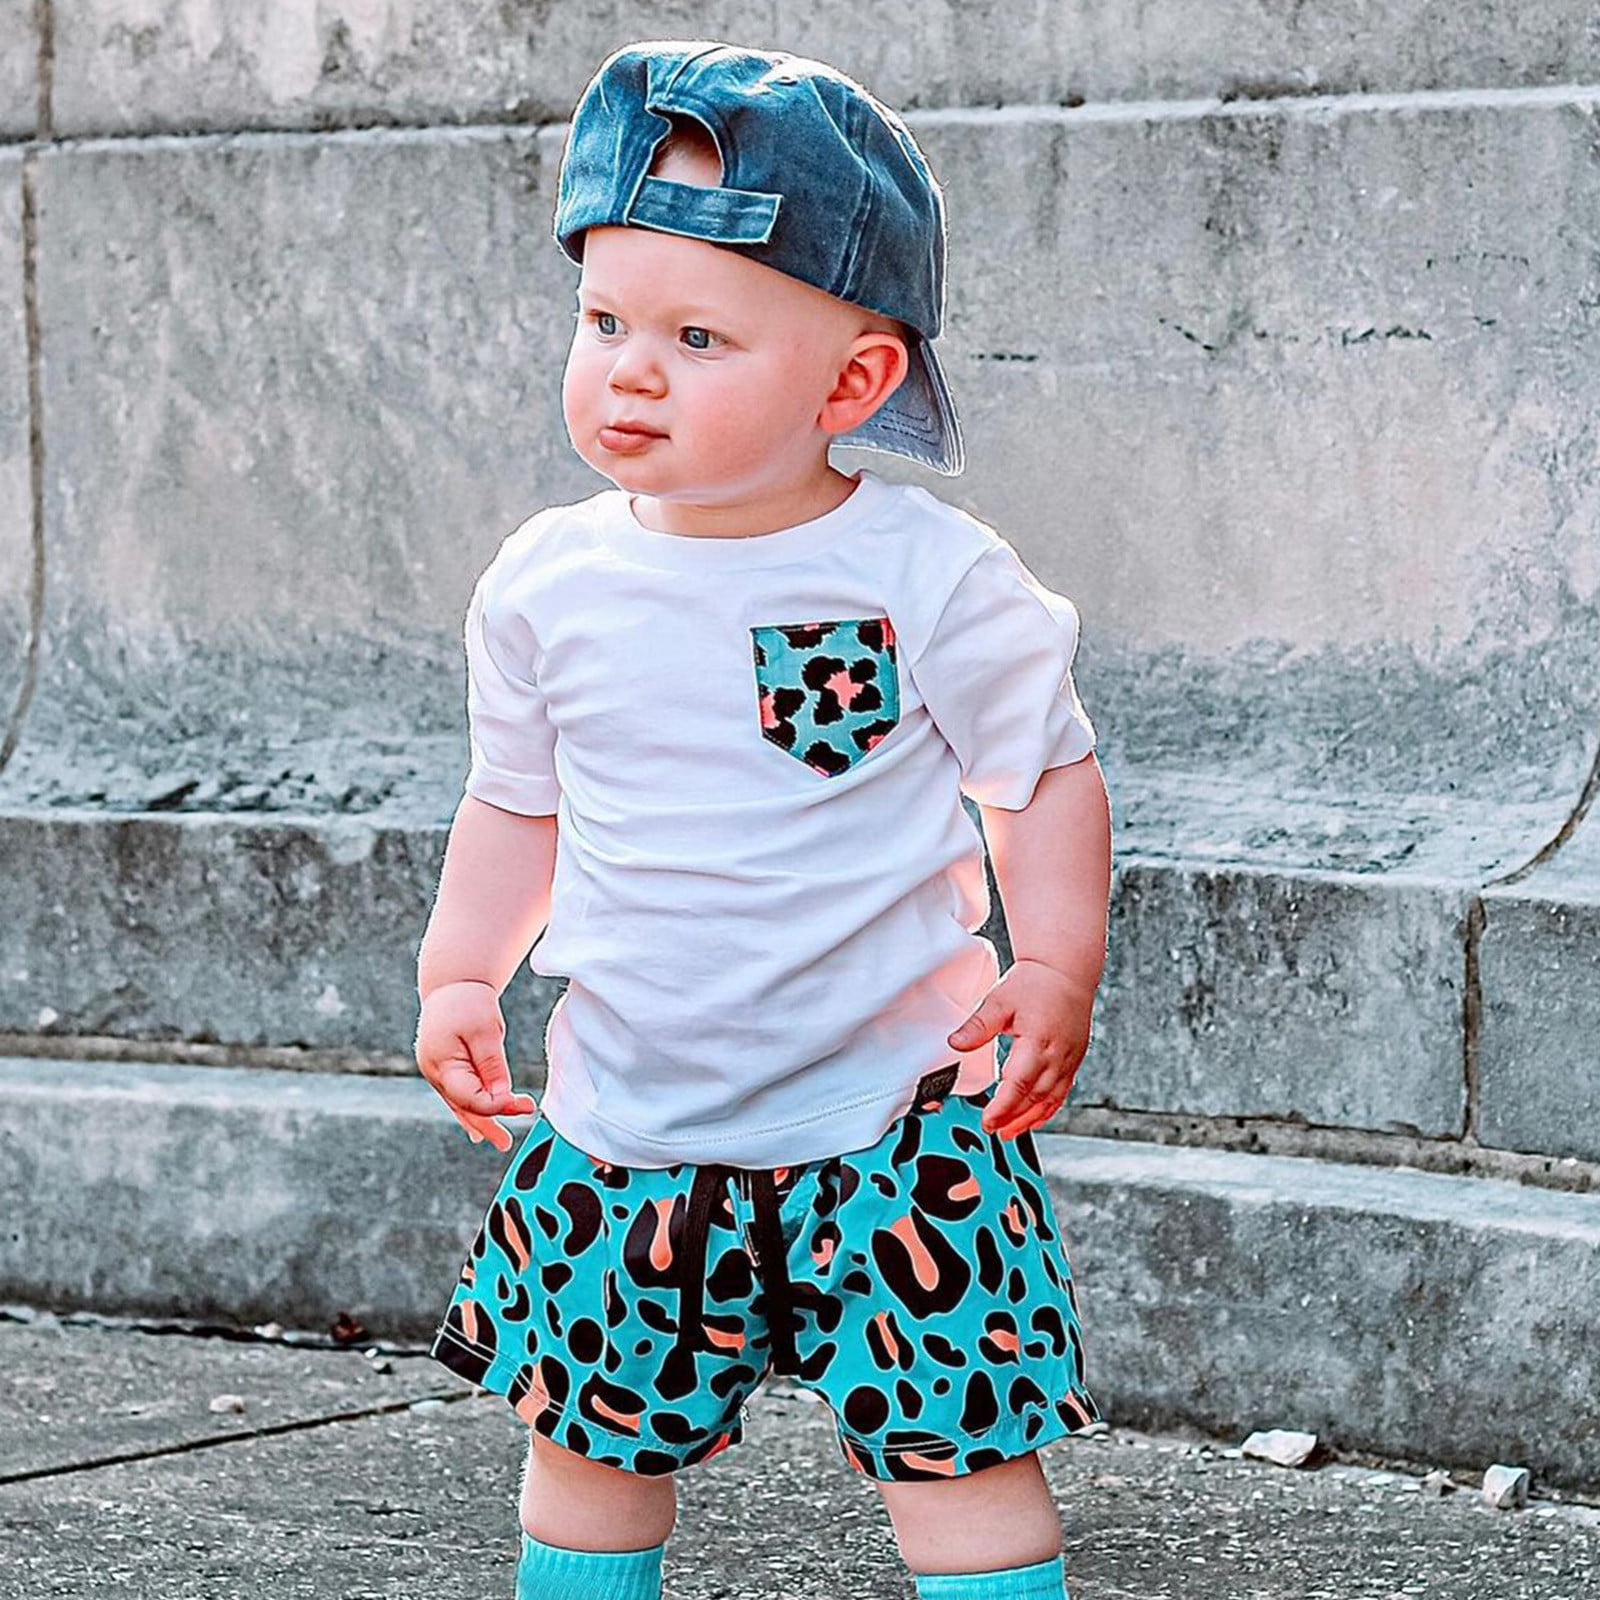 Toddler Boy Clothes Baby Outfit Summer Letter Print Short Sleeve T Shirt Top+Ripped Jeans Pants Gift Infant Clothes Set 